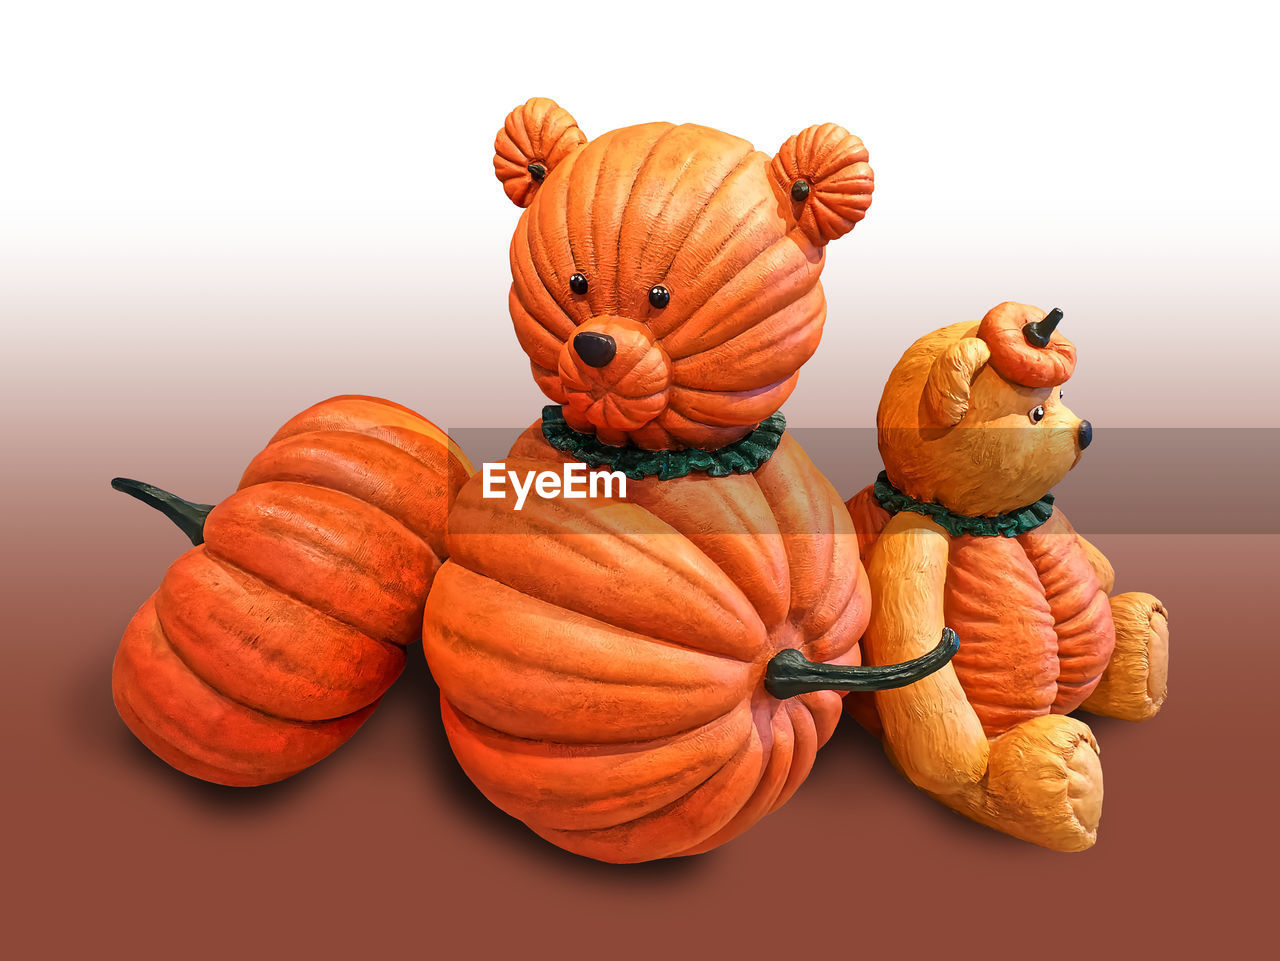 Close-up of pumpkin bear against white background